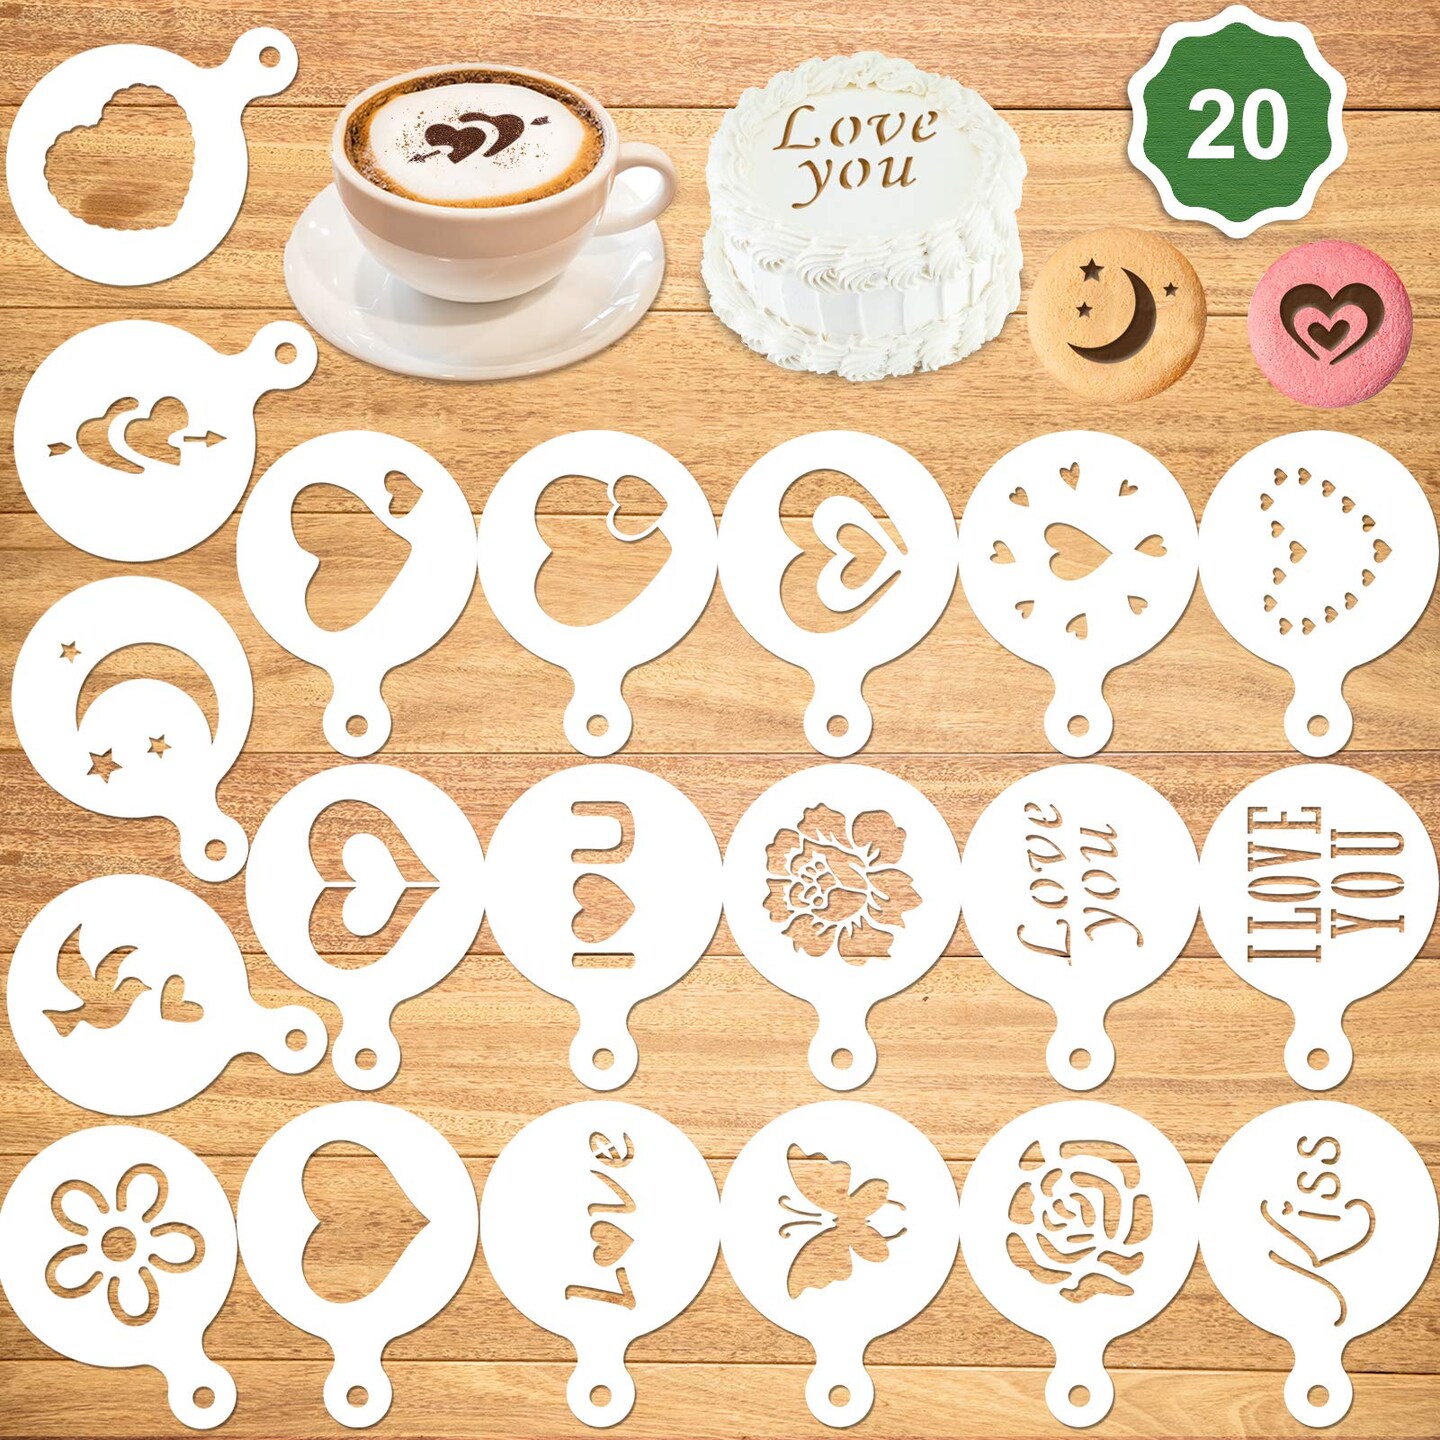 Konsait 20Pack Valentine&#x27;s Day Cake Stencil Templates Decoration, Reusable Valentine Day Cake Cookies Baking Painting Mold Tools, for Decorating Dessert Coffee Oatmeal Cappuccino Mousse Hot Chocolate